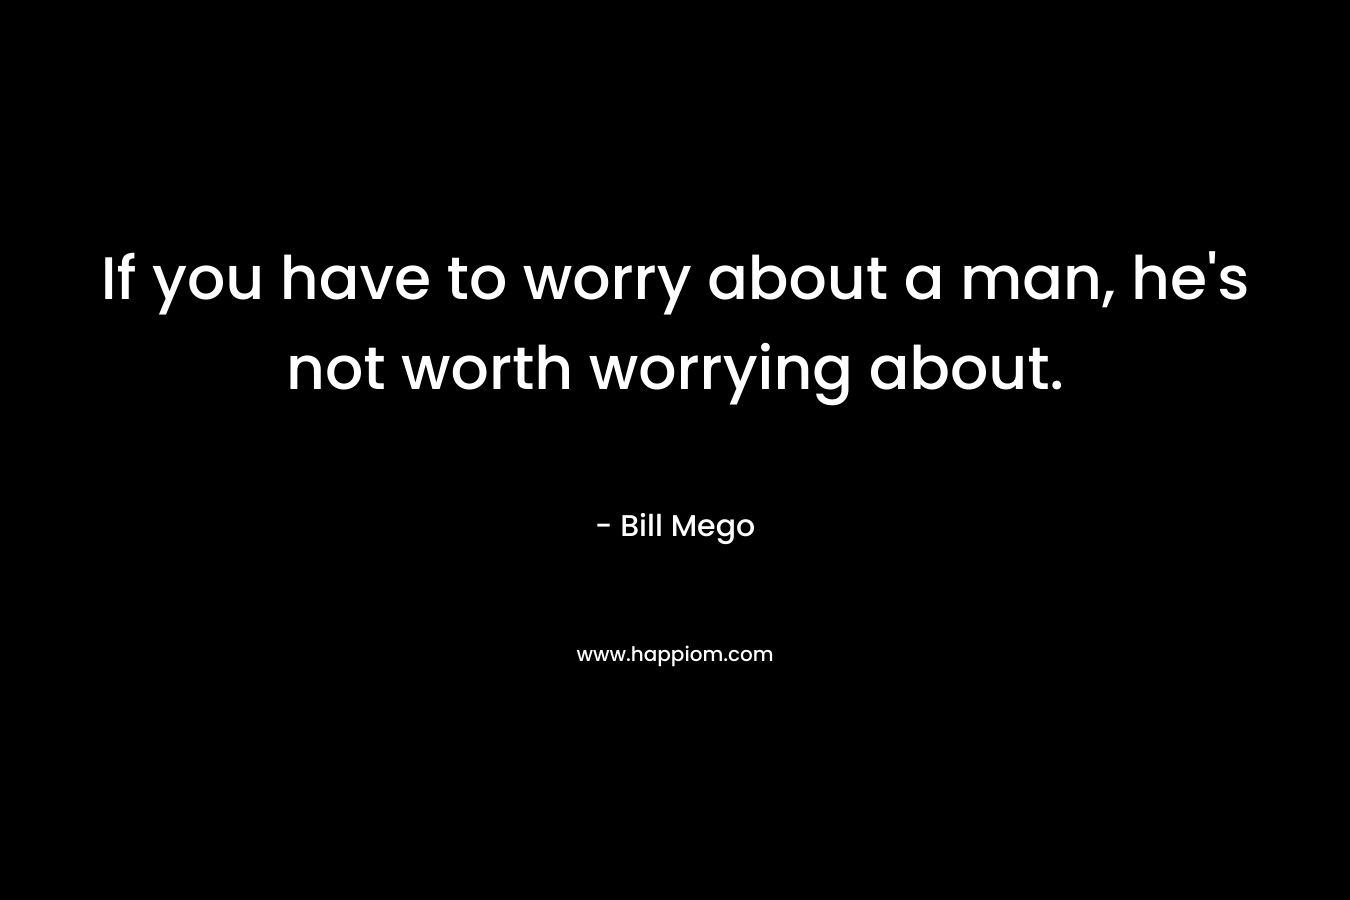 If you have to worry about a man, he's not worth worrying about.